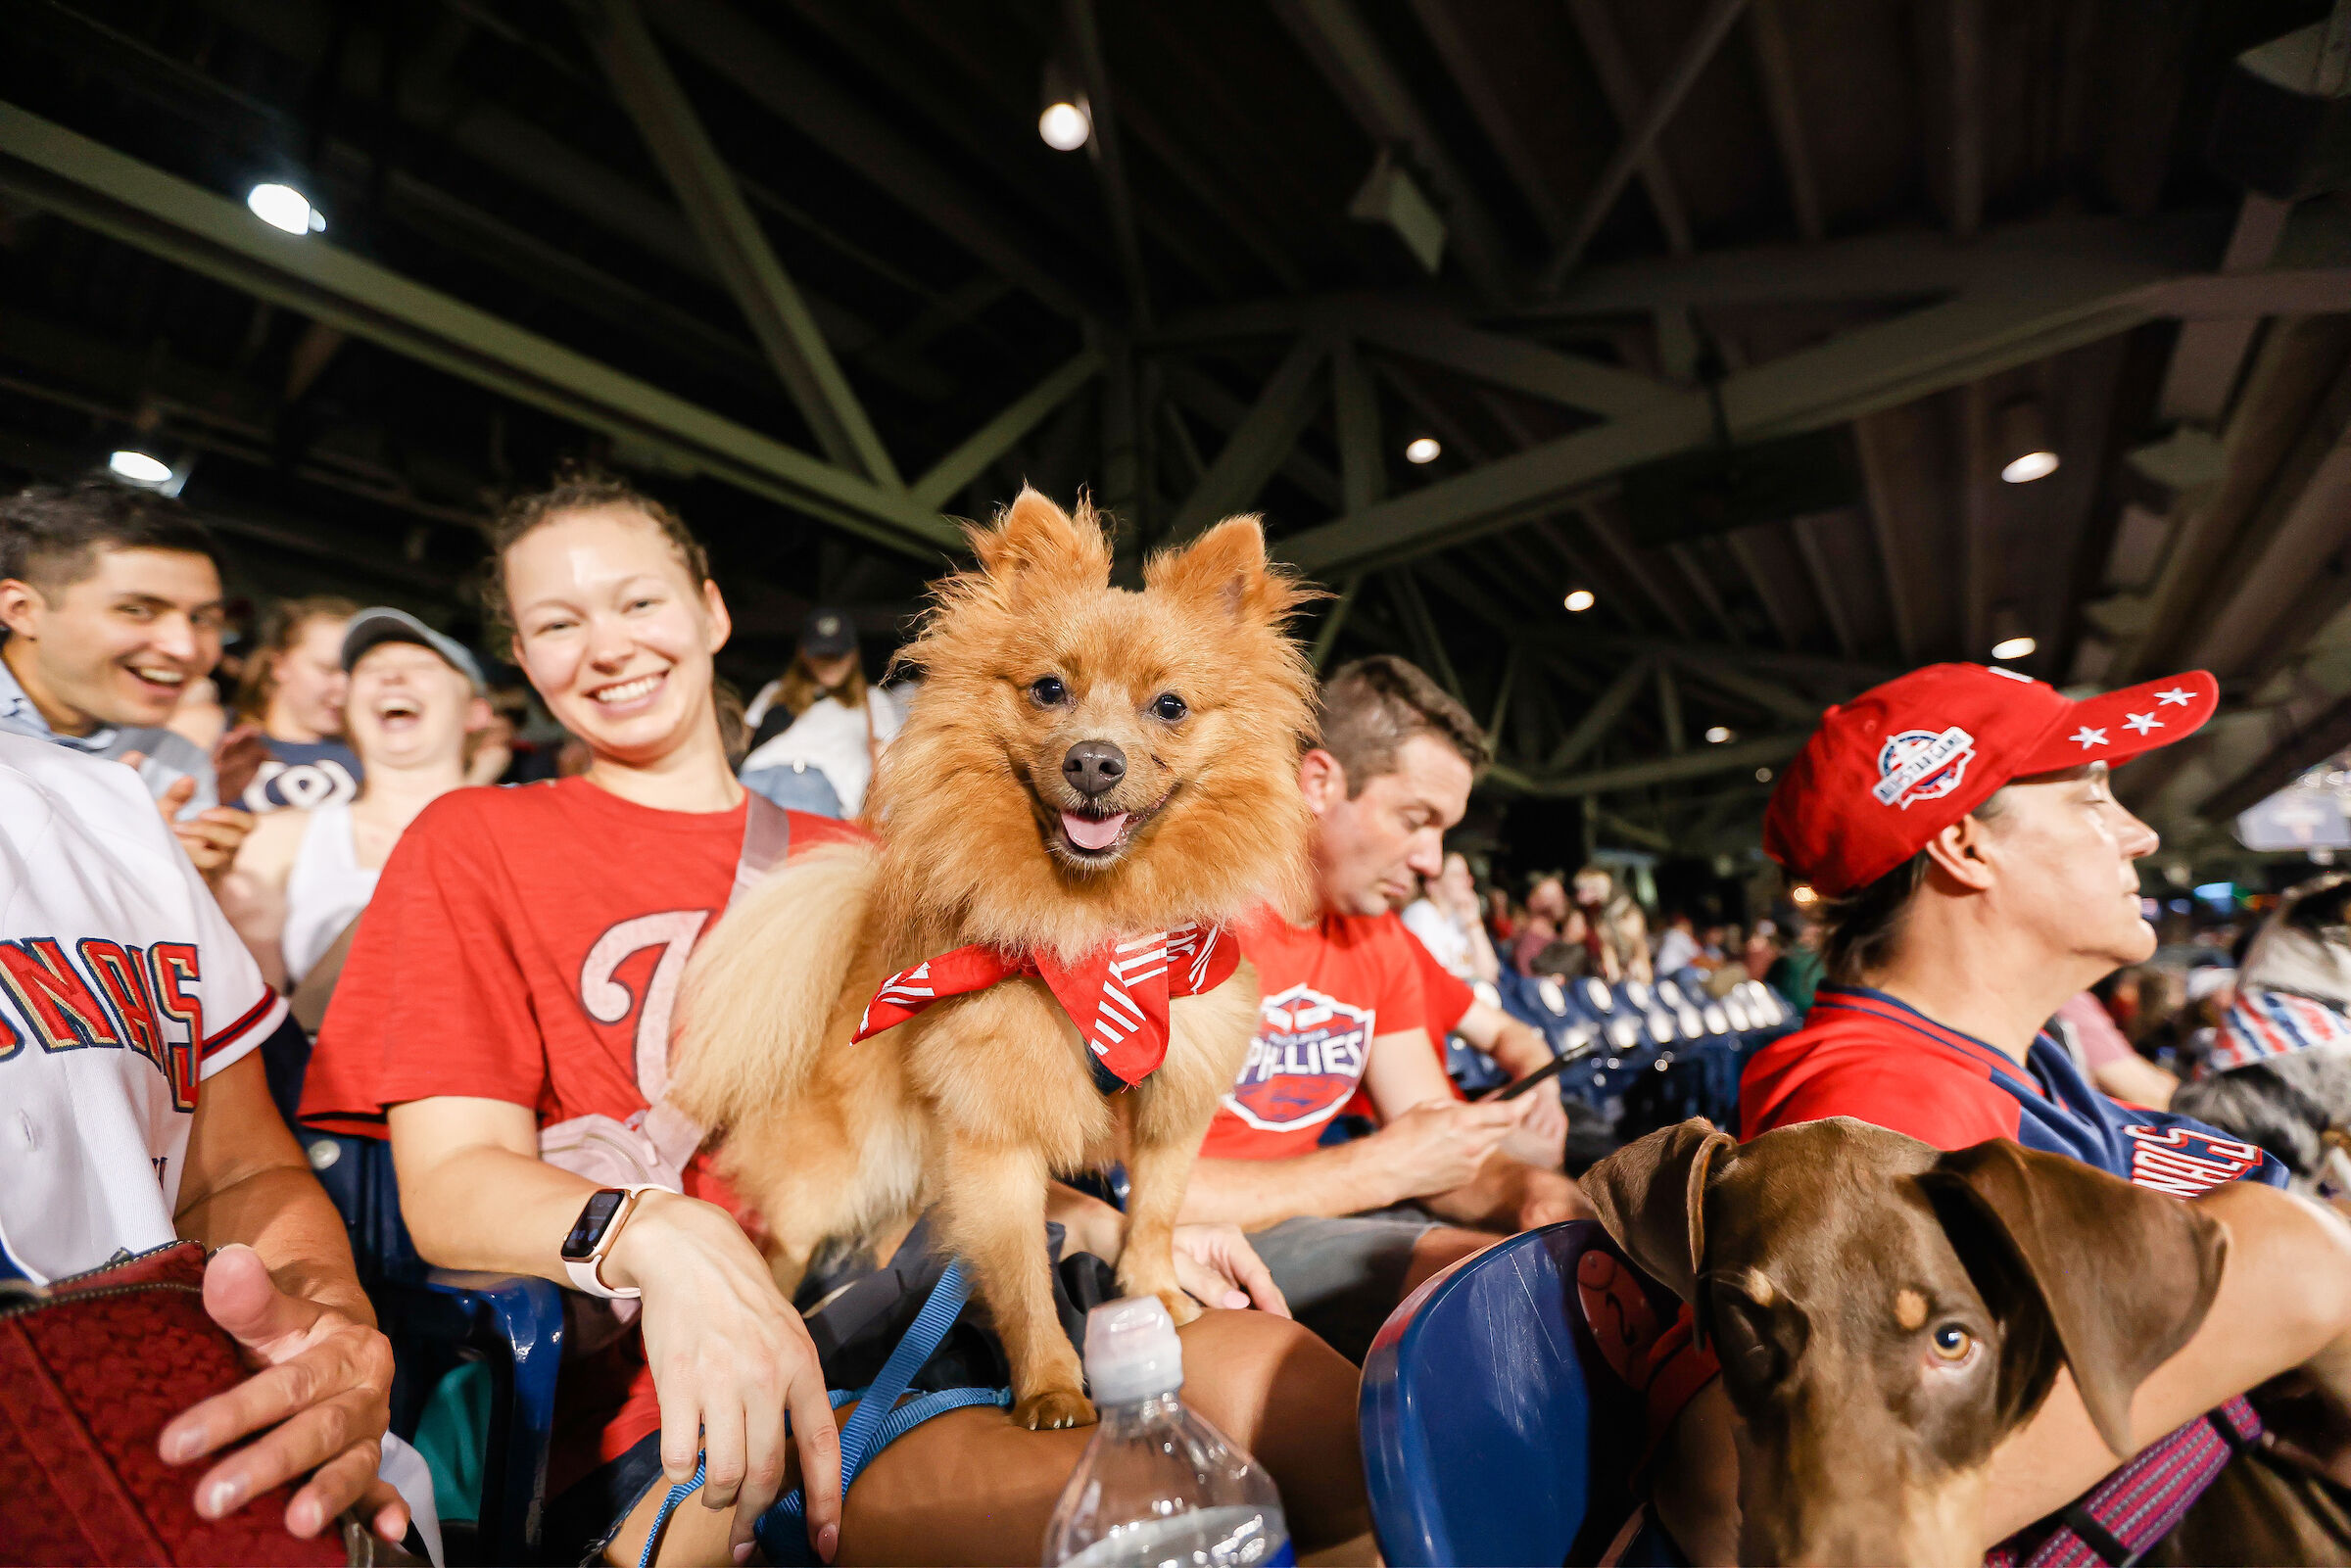 Pups in the Park': Want to bring your dog to the Nationals game? Here's how